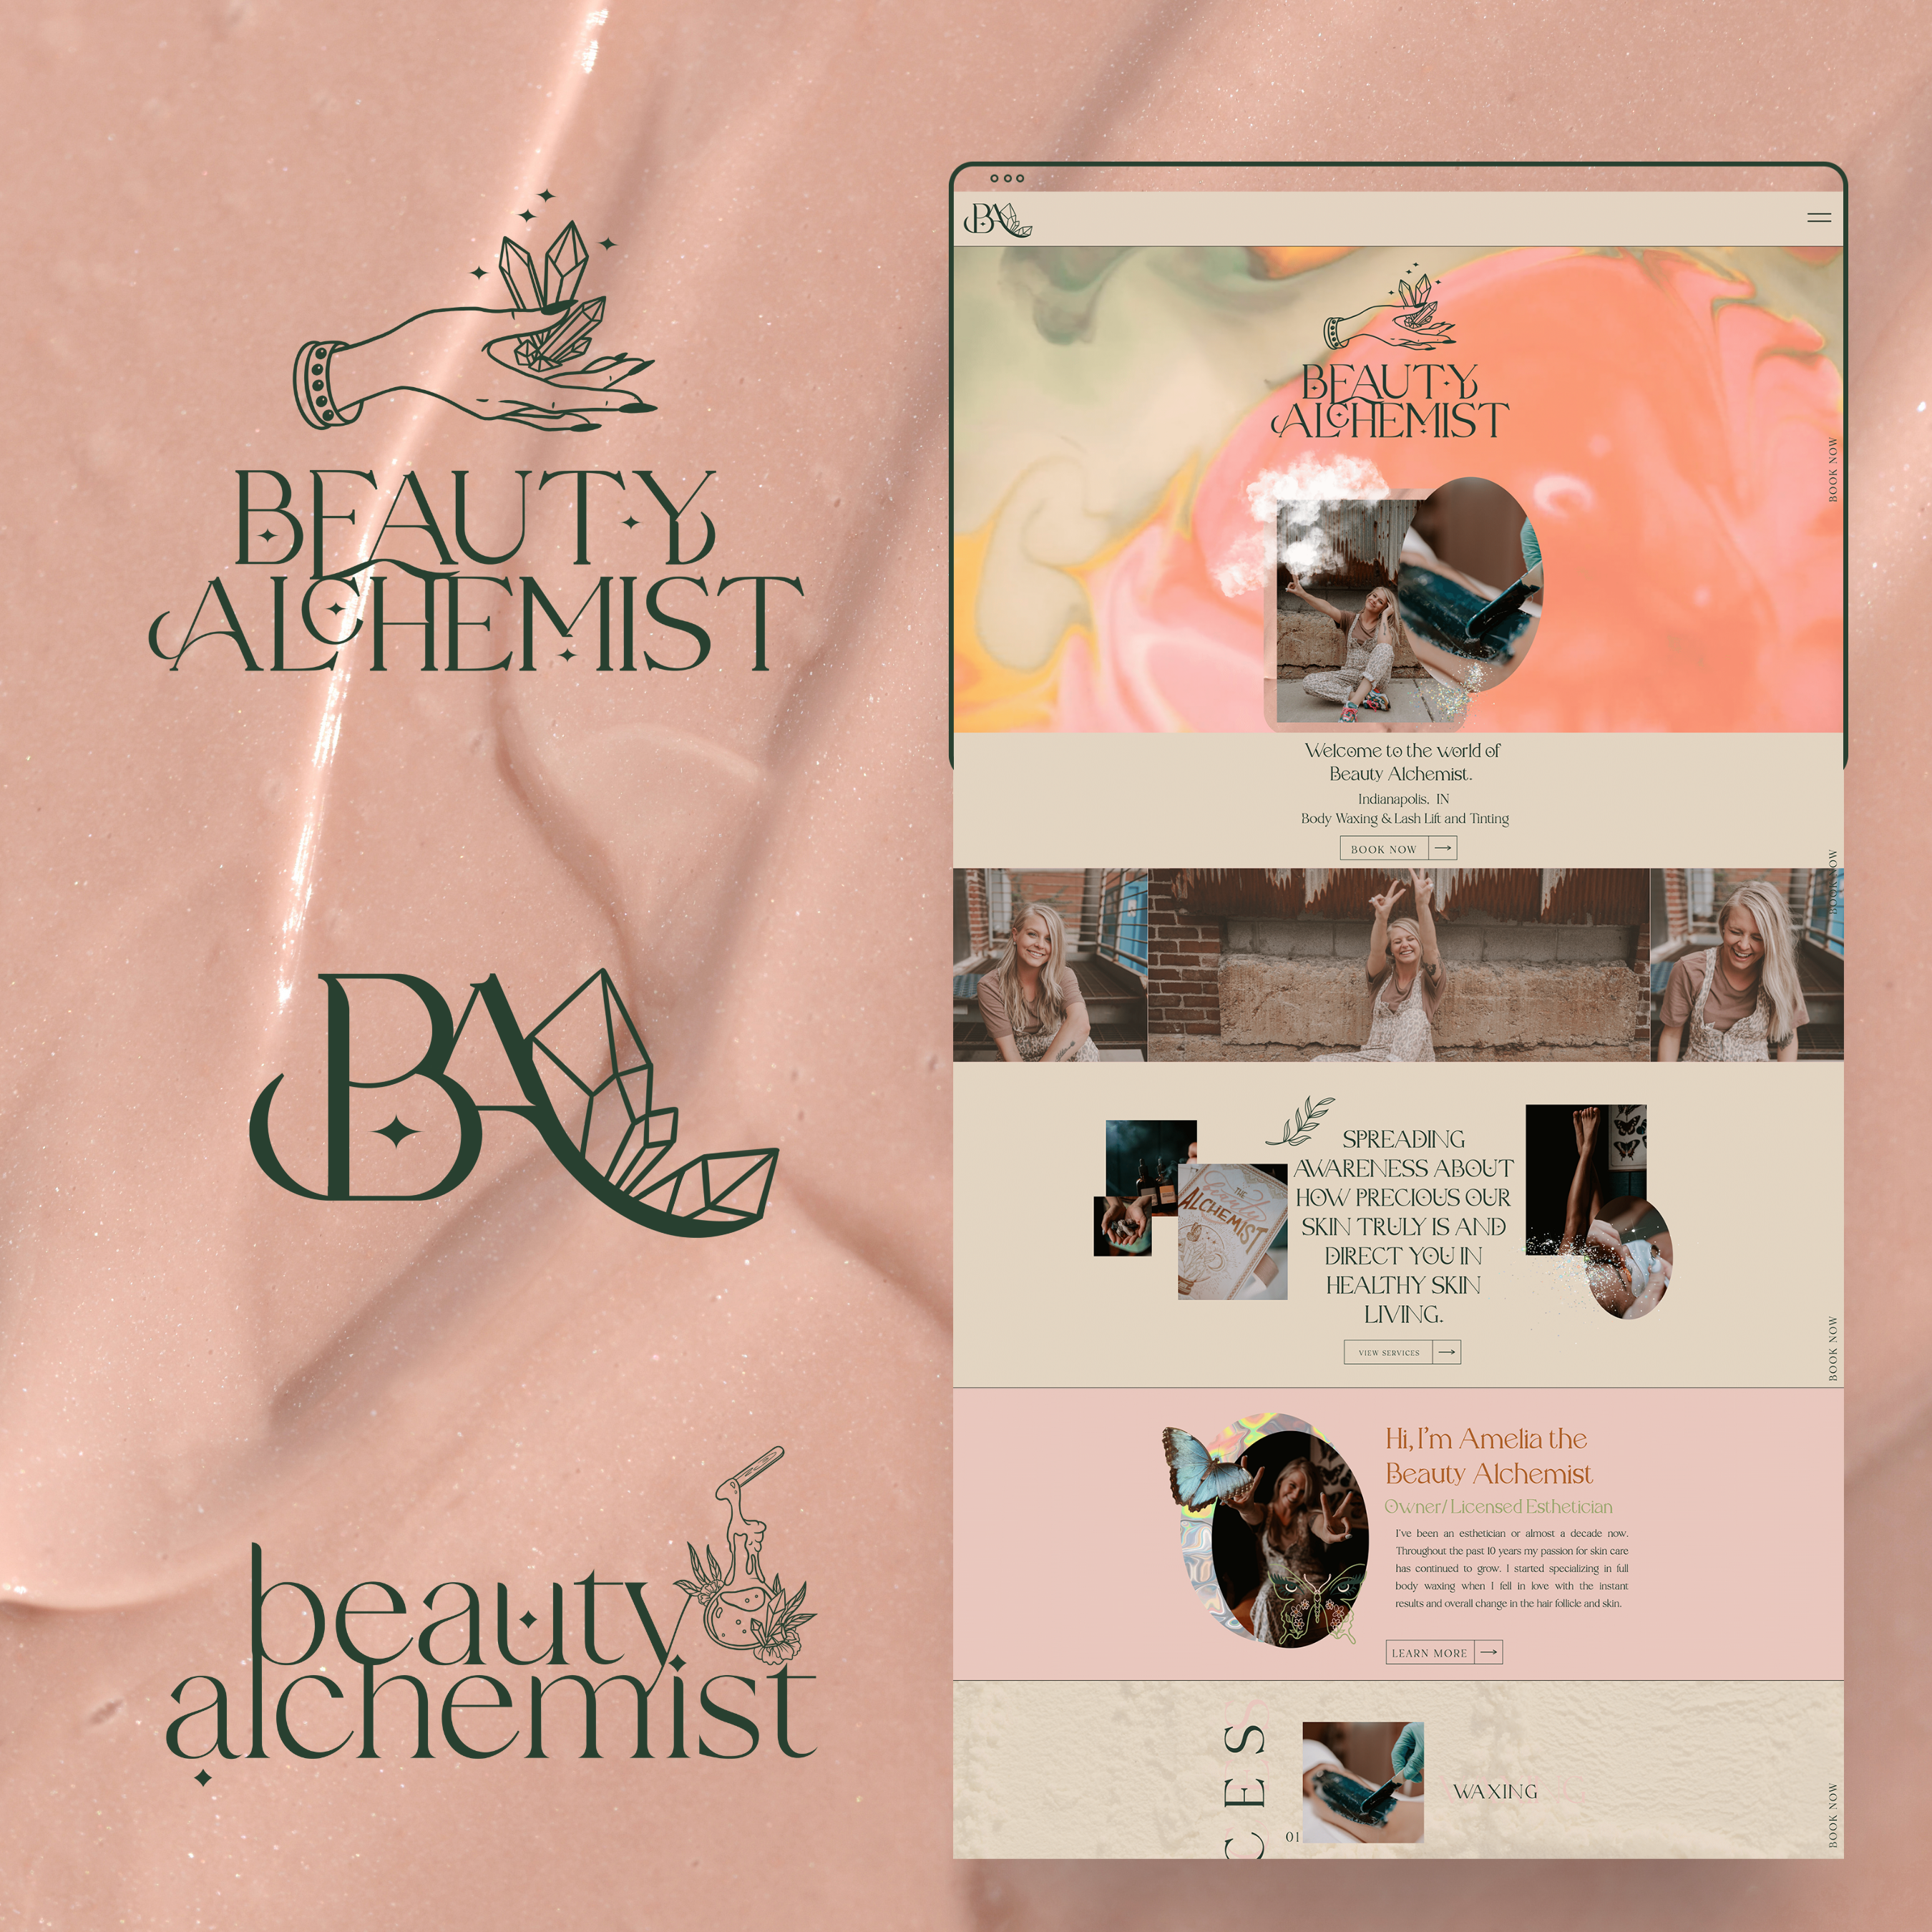 Logo and website design for a mystical esthetician brand and web design by House of W, a brand and web designer for photographers and creatives.